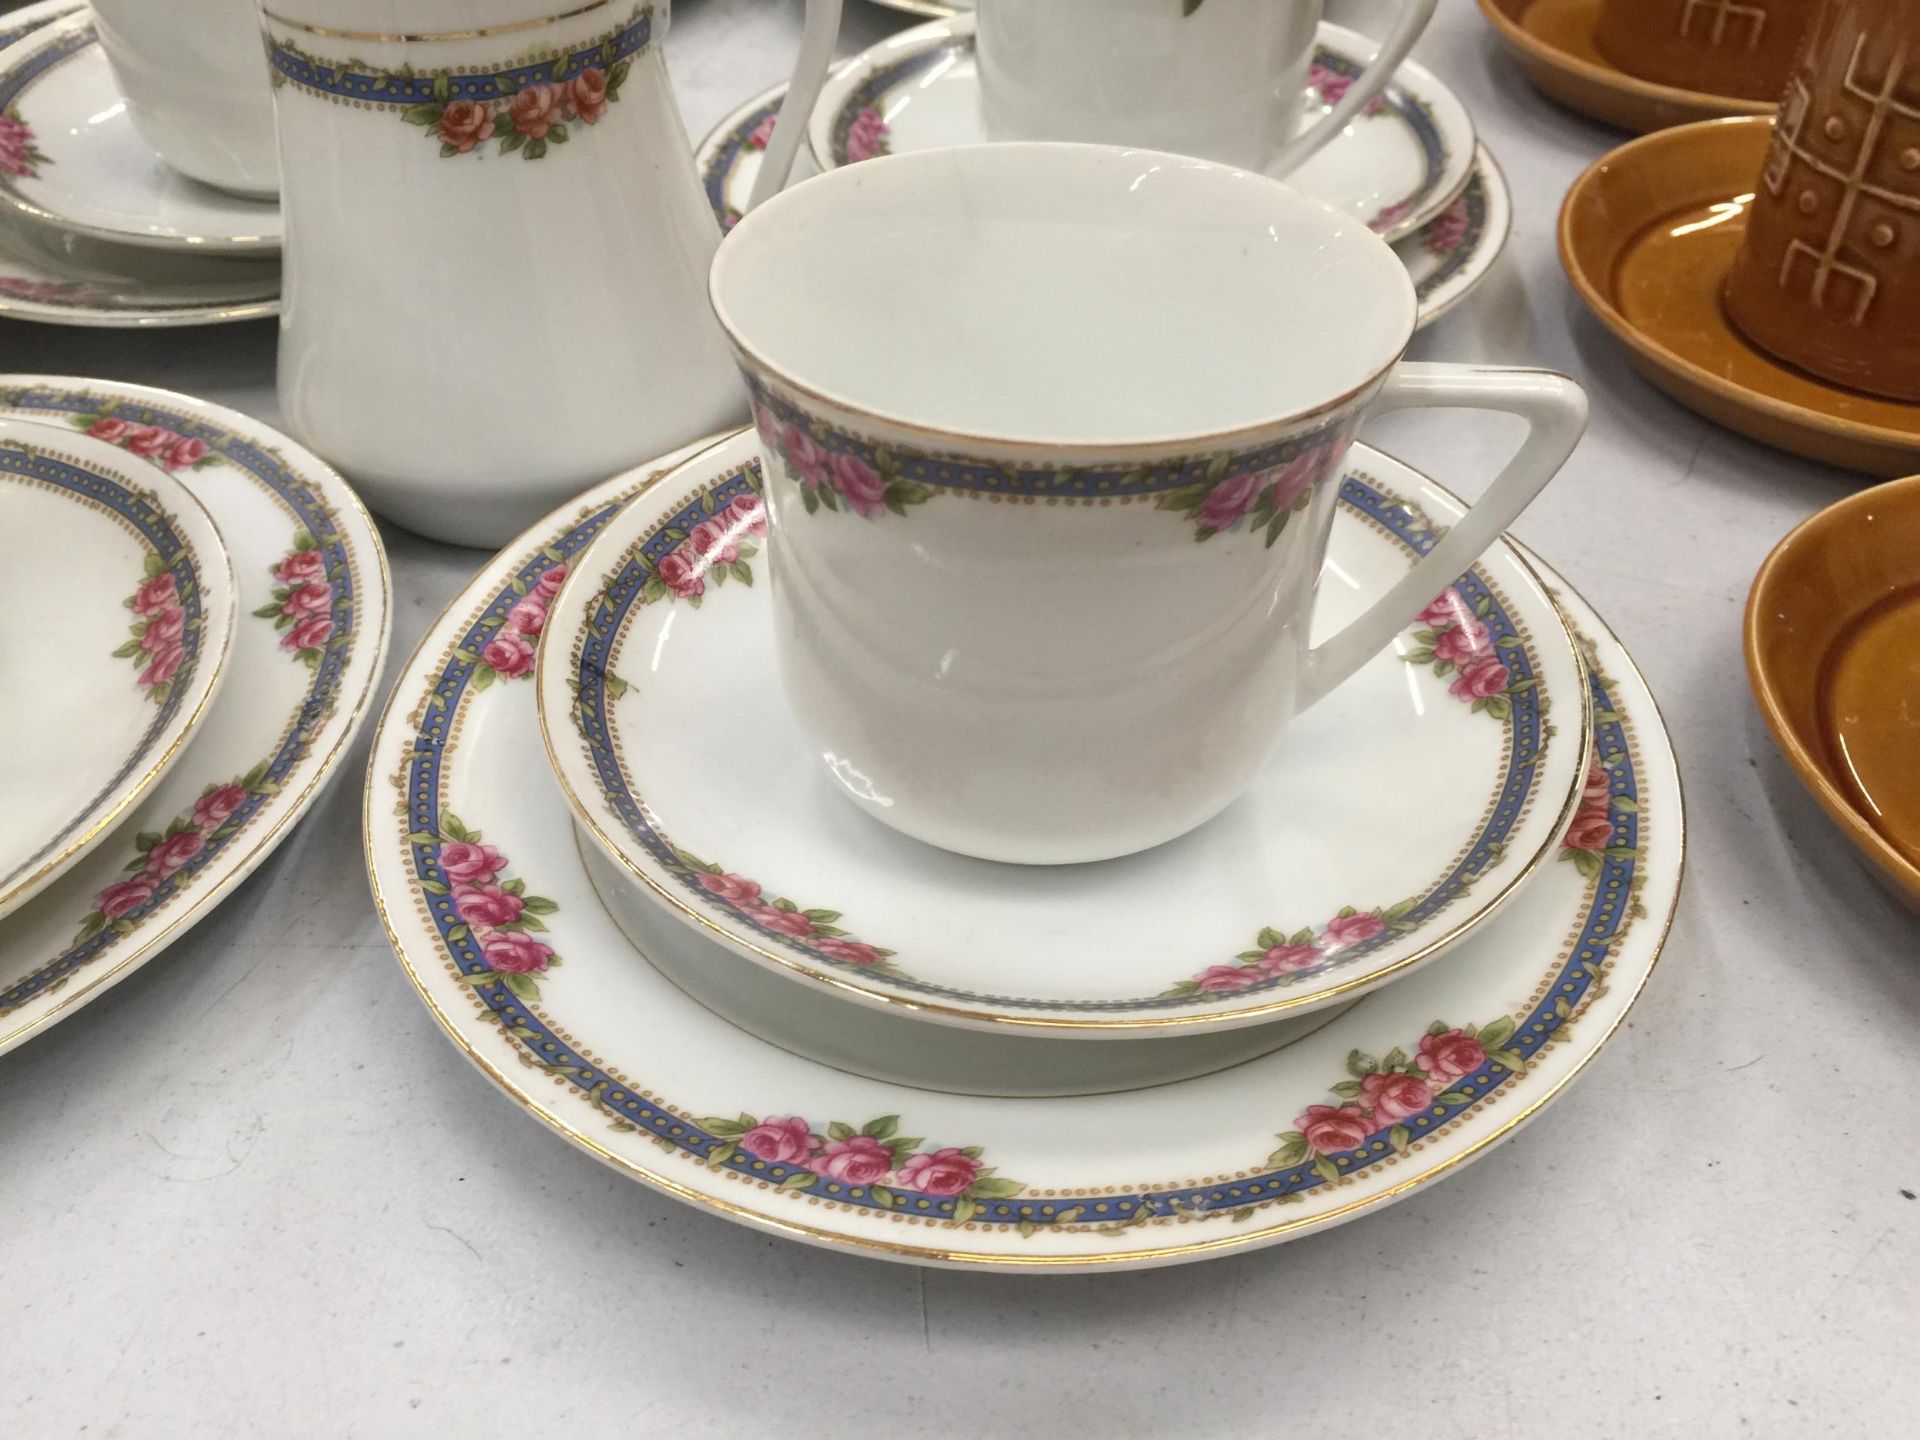 A LARGE QUANTITY OF TEAWARE TO INCLUDE CUPS, SAUCERS, PLATES, CREAM JUG AND SUGAR BOWL - Image 2 of 6